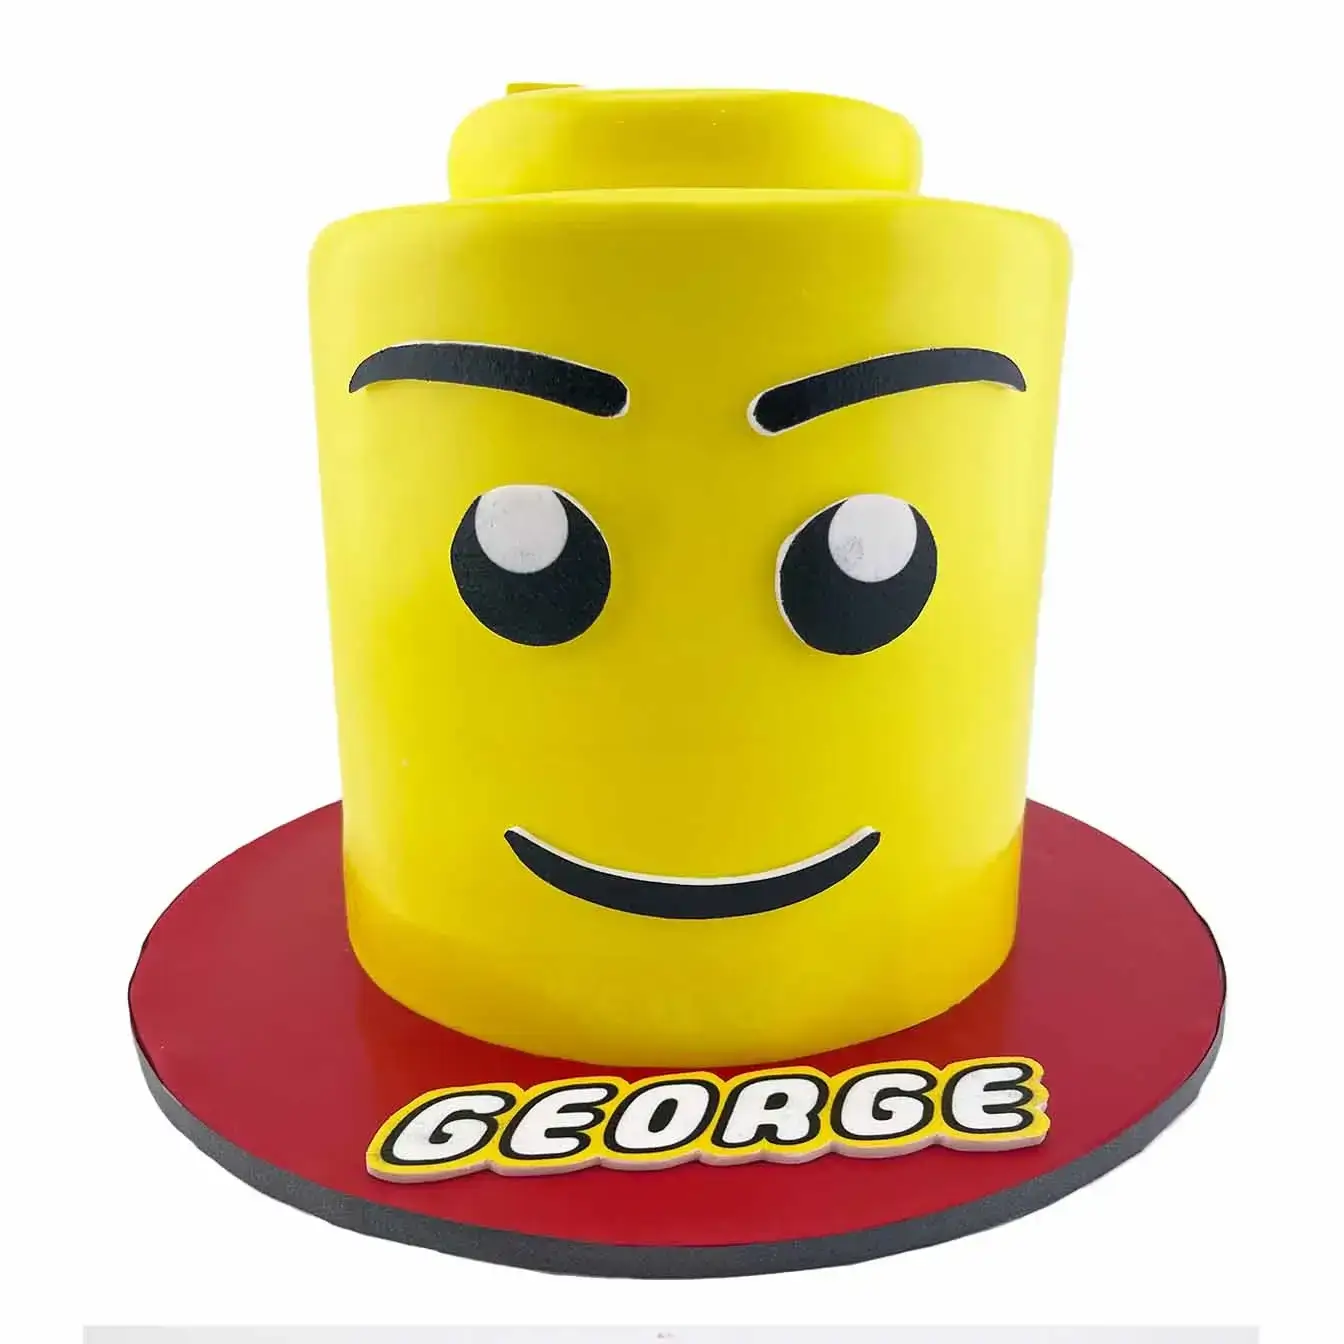 Lego Head Delight Cake - A cake shaped like the iconic Lego head, a playful centerpiece for birthdays and celebrations filled with creativity and fun.